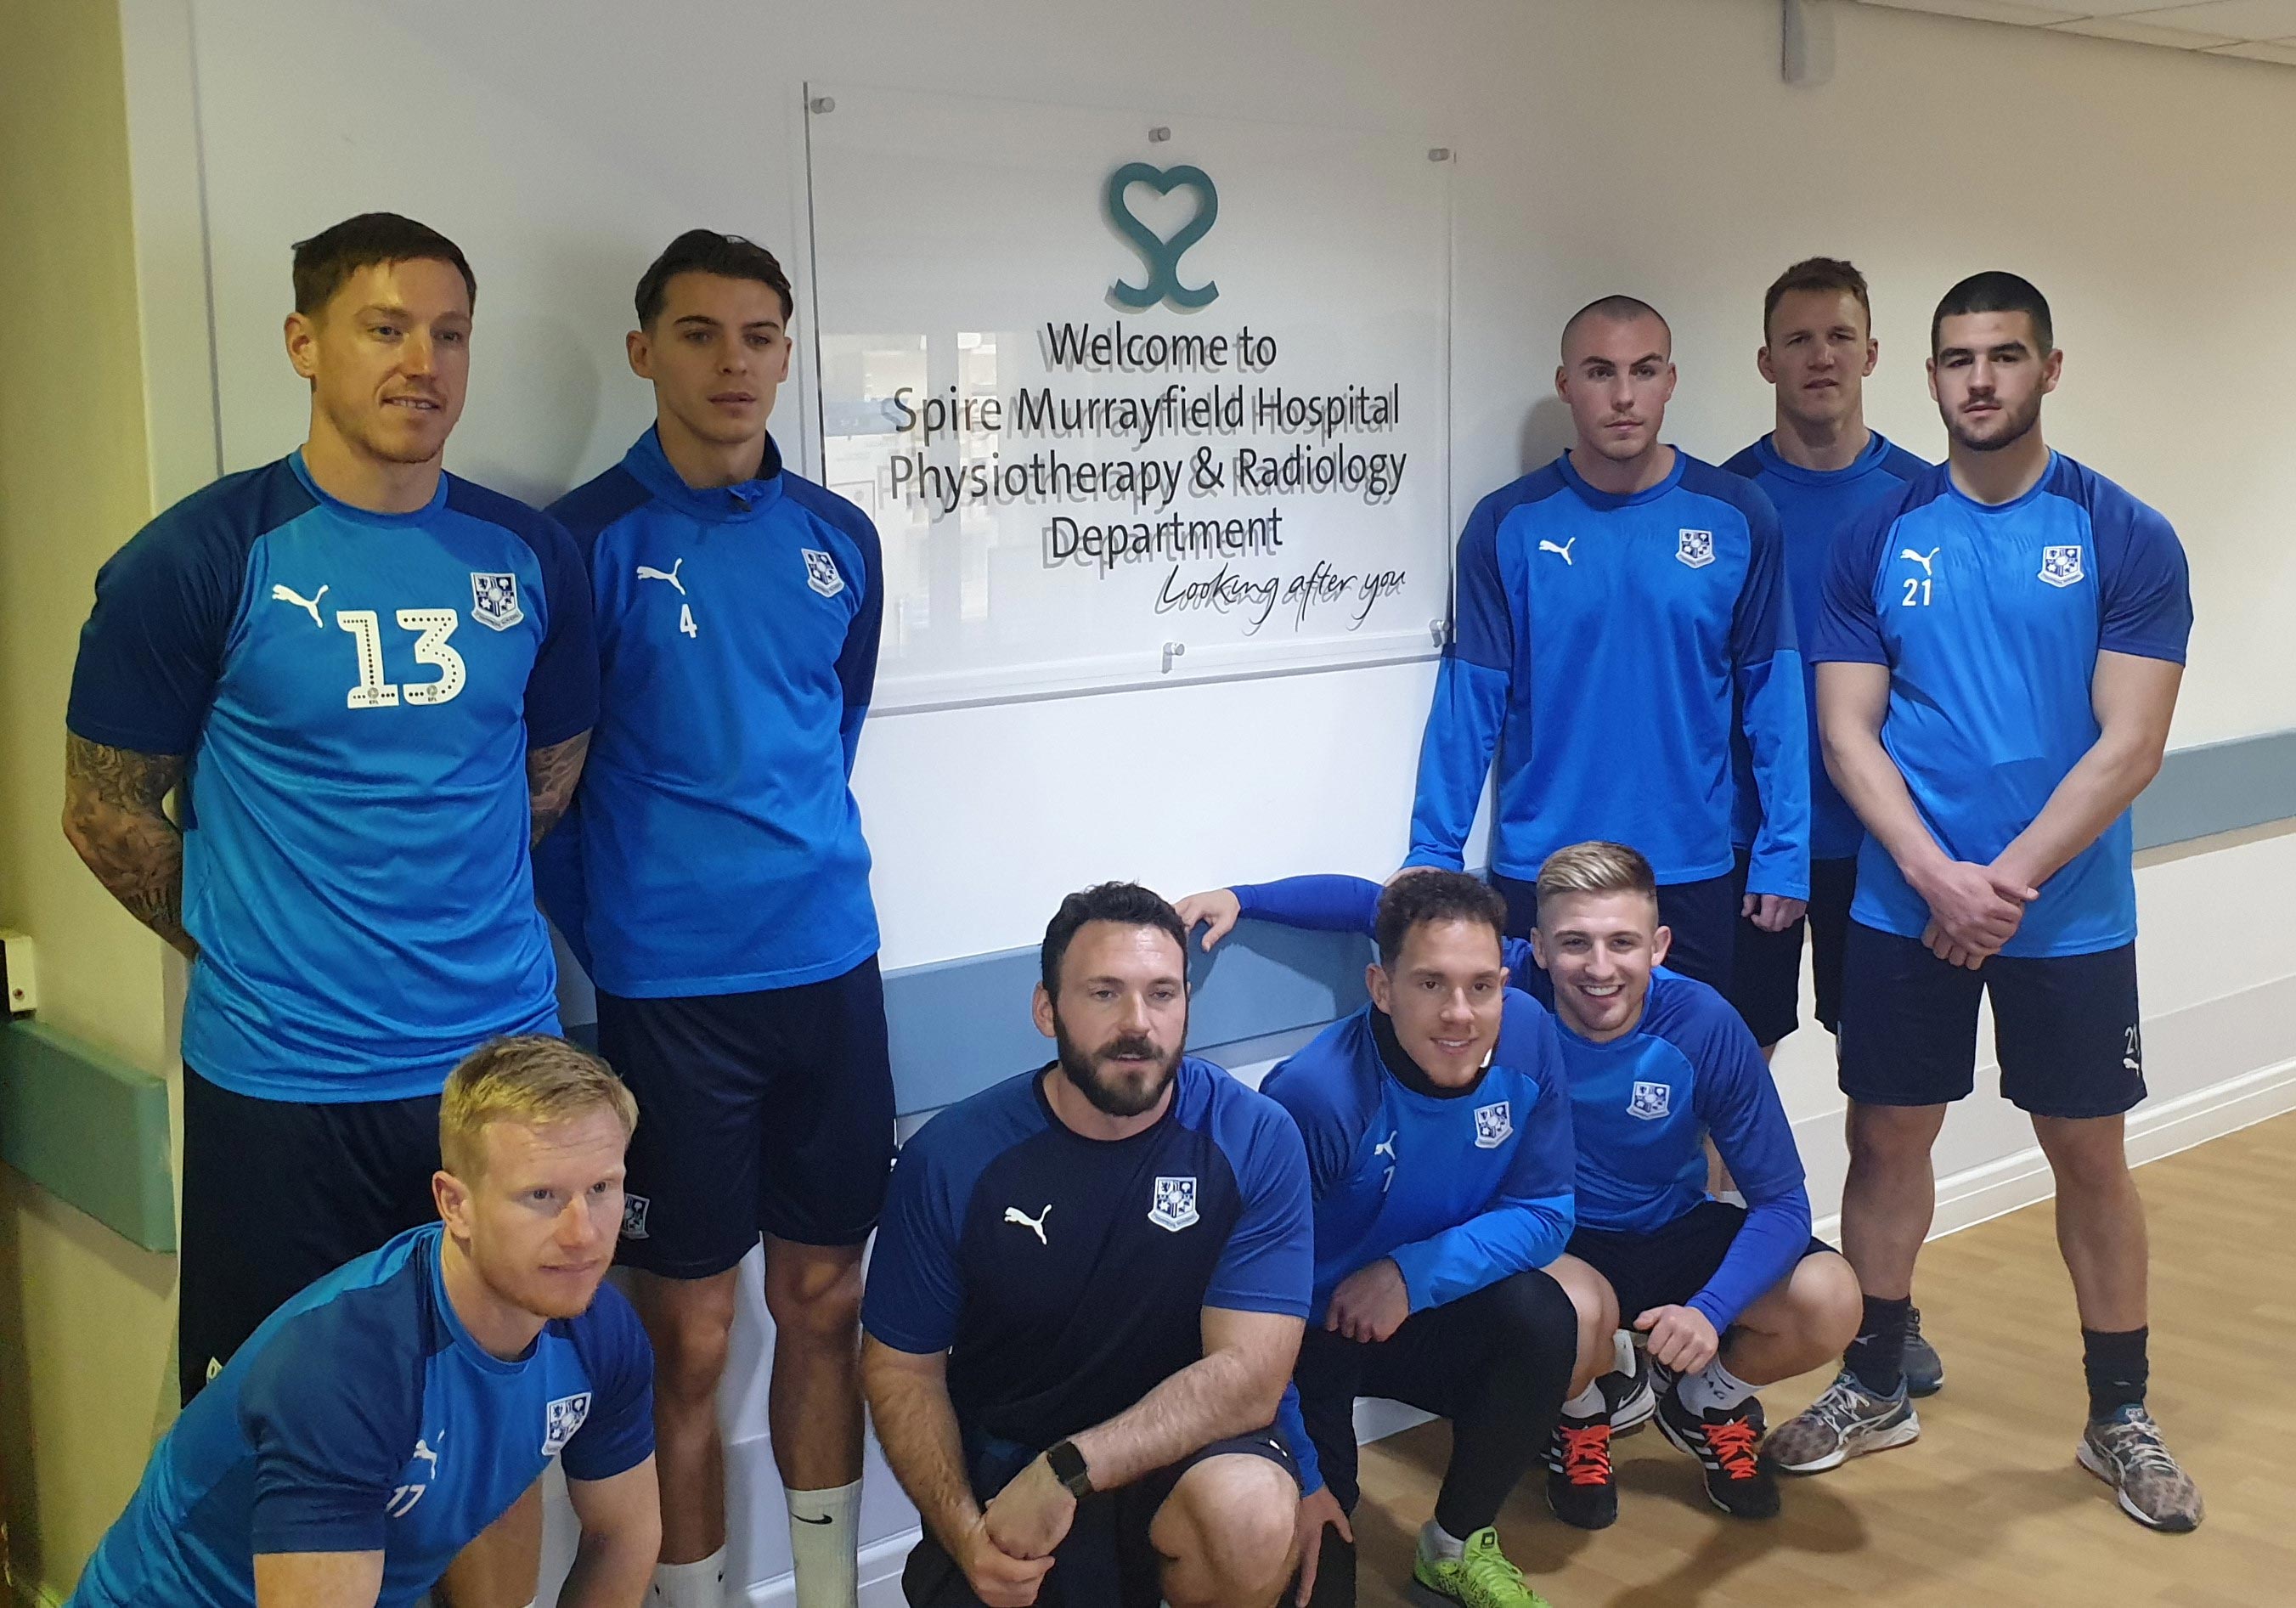 Spire Murrayfield Hospital, Wirral is now the official medical partner of Tranmere Rovers Football Club